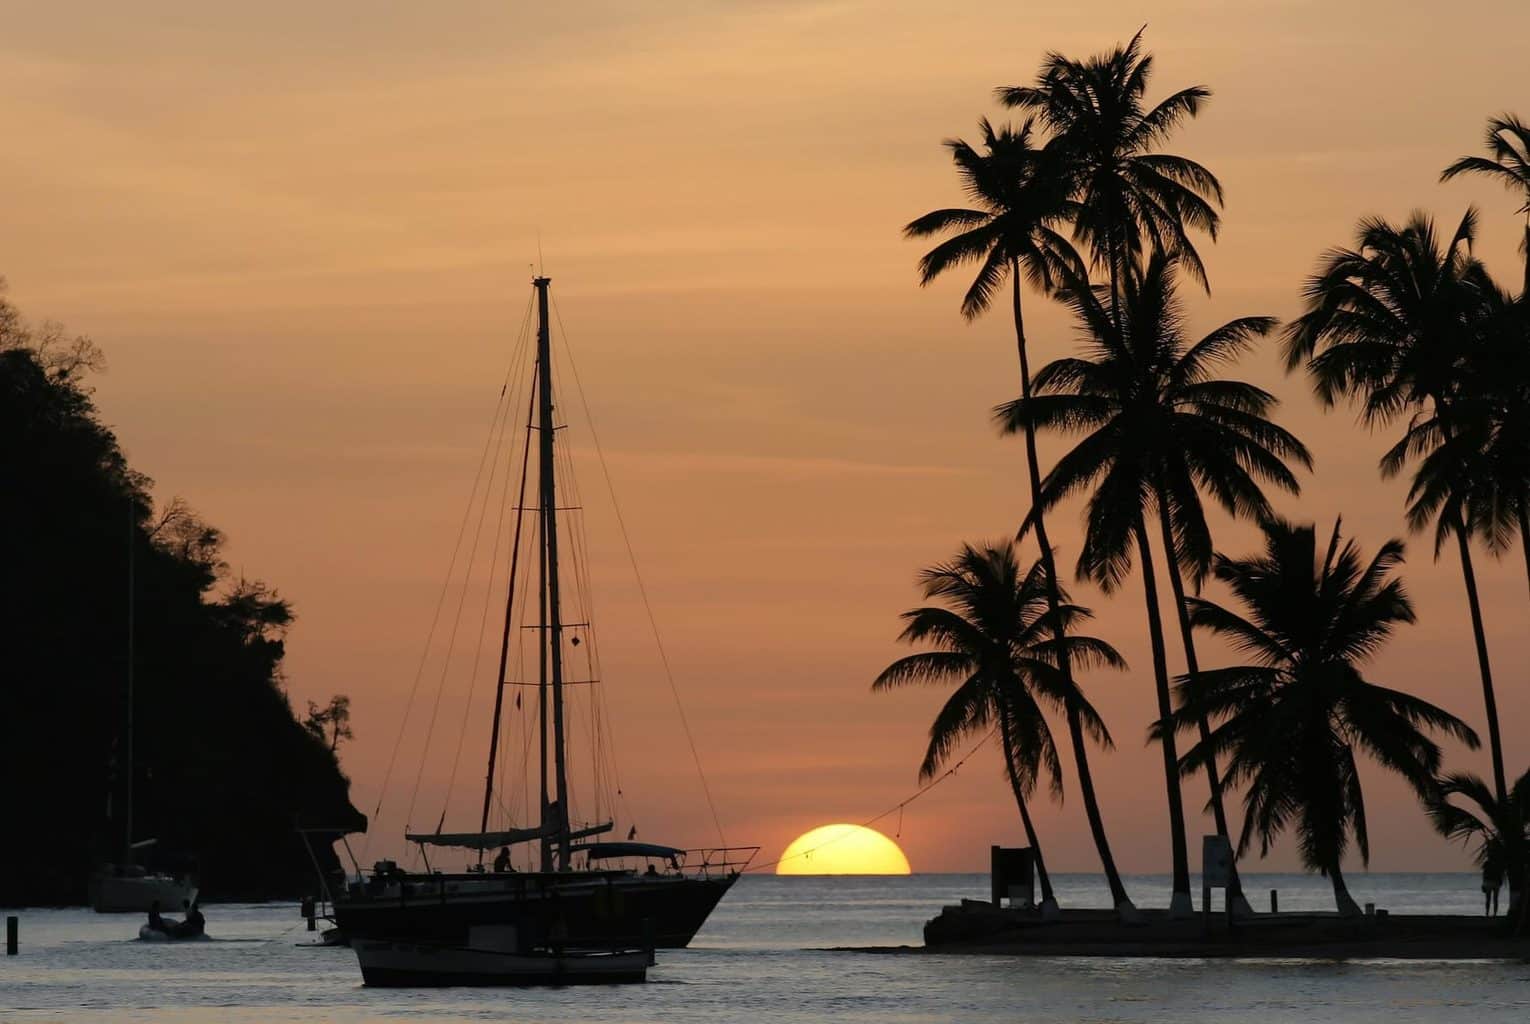 Luxury Holiday to St Lucia - Boat, palm tree on ocean at sunset